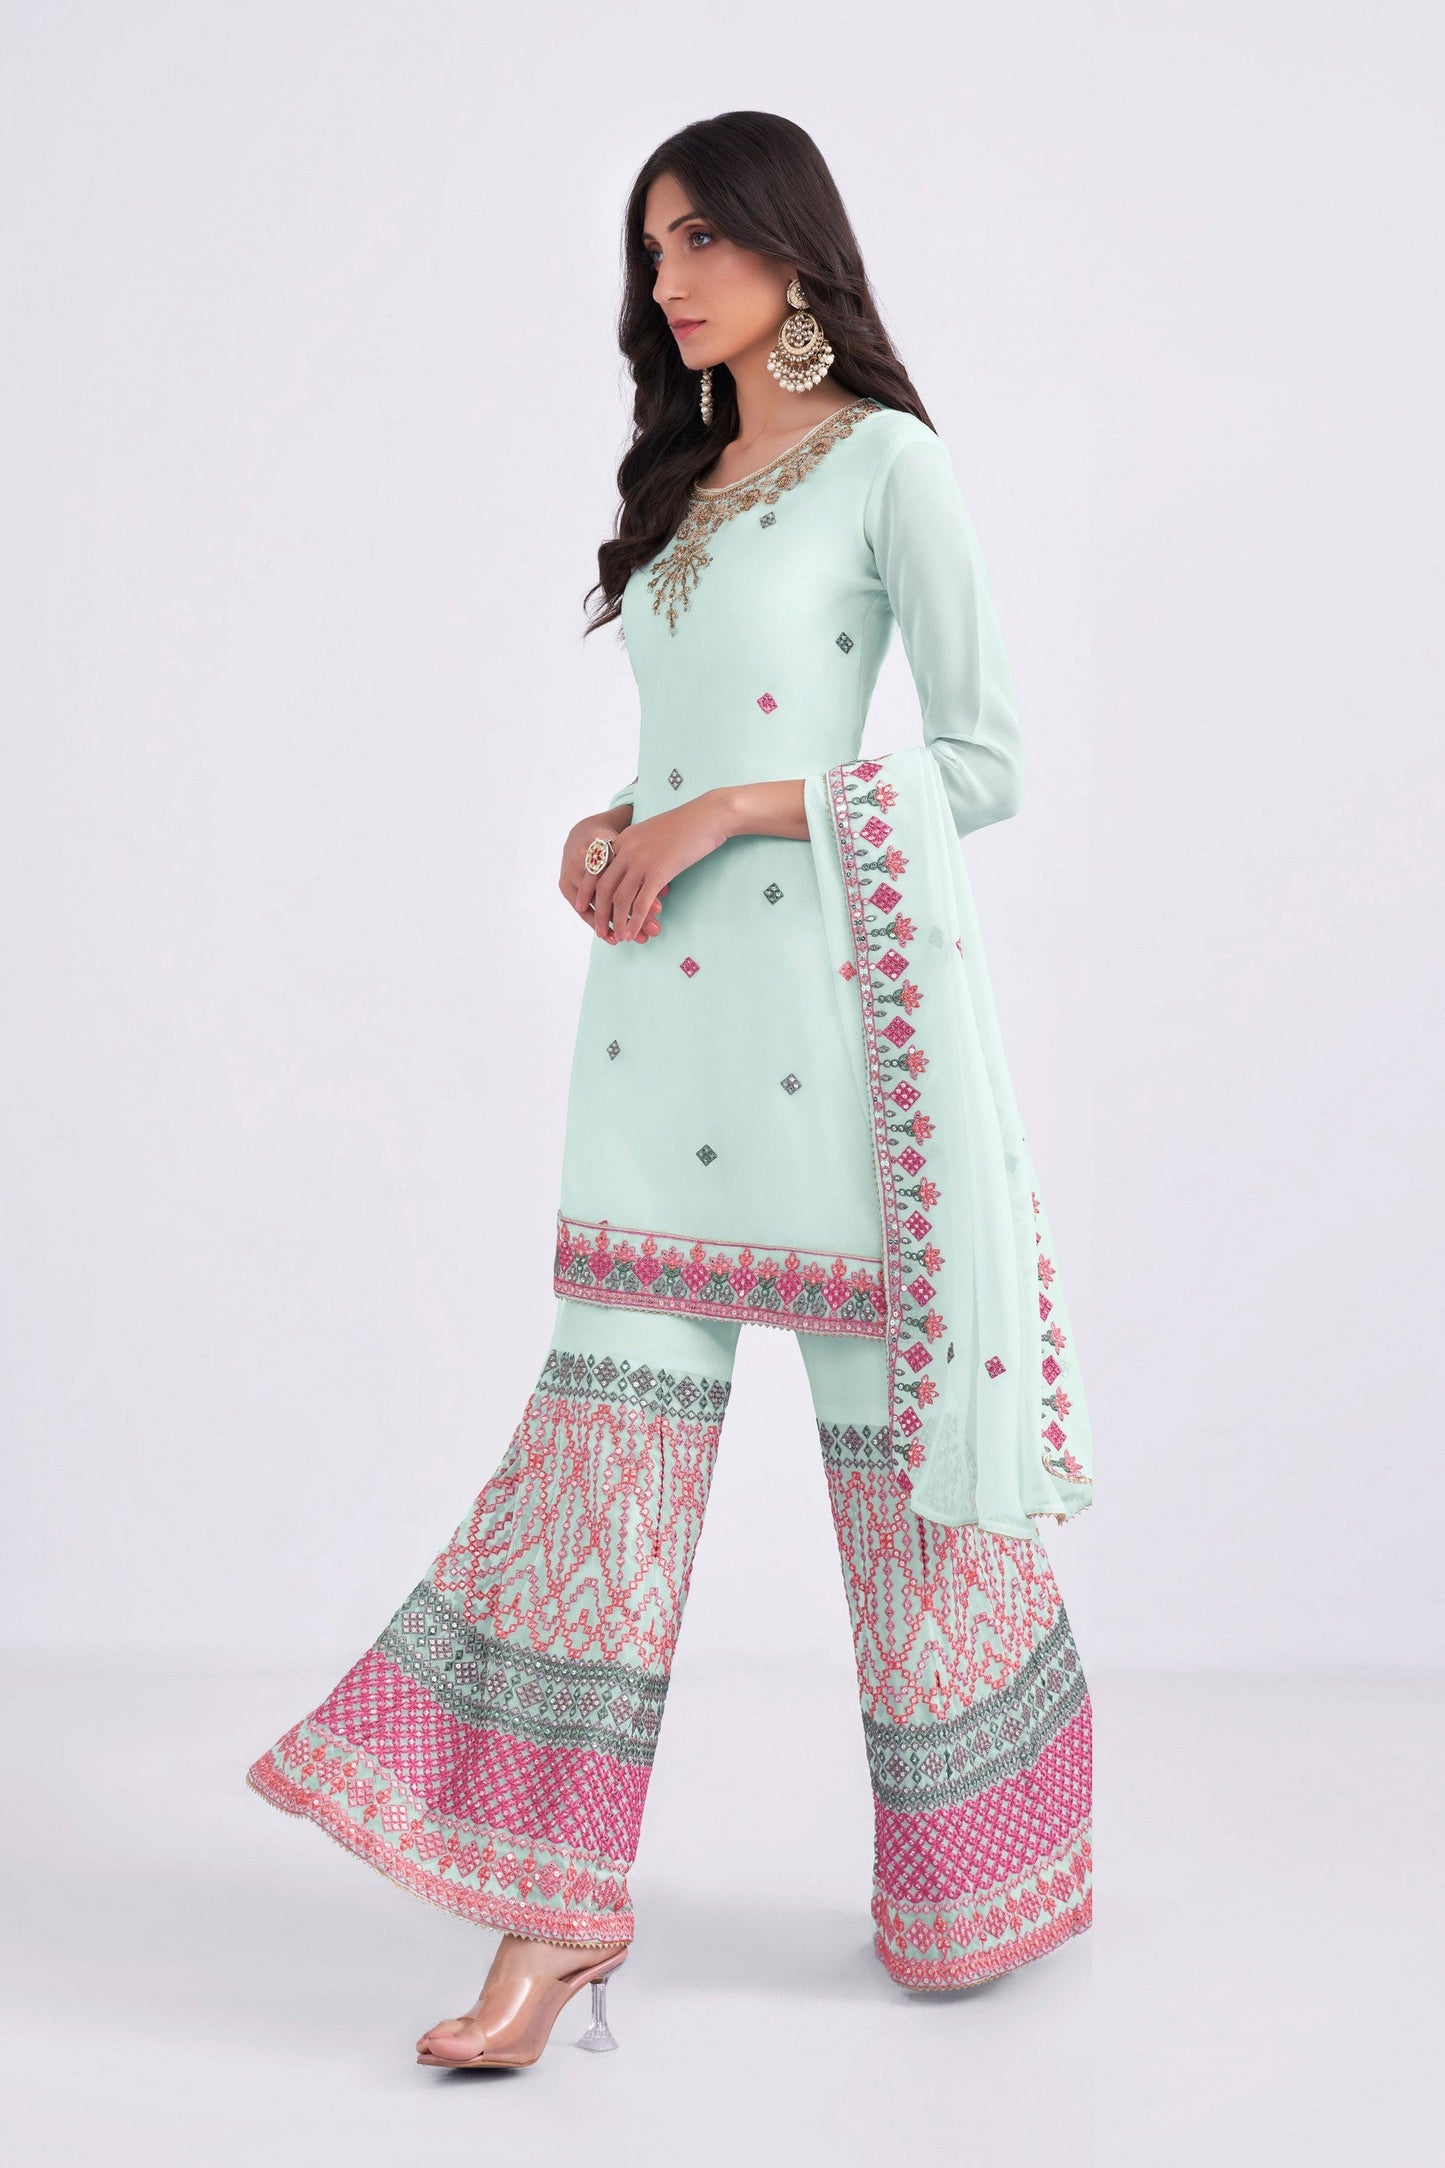 Light Blue Pakistani Georgette Sharara For Indian Festivals & Weddings - Sequence Embroidery Work, Thread Embroidery Work, Khatli Work, Zari Work